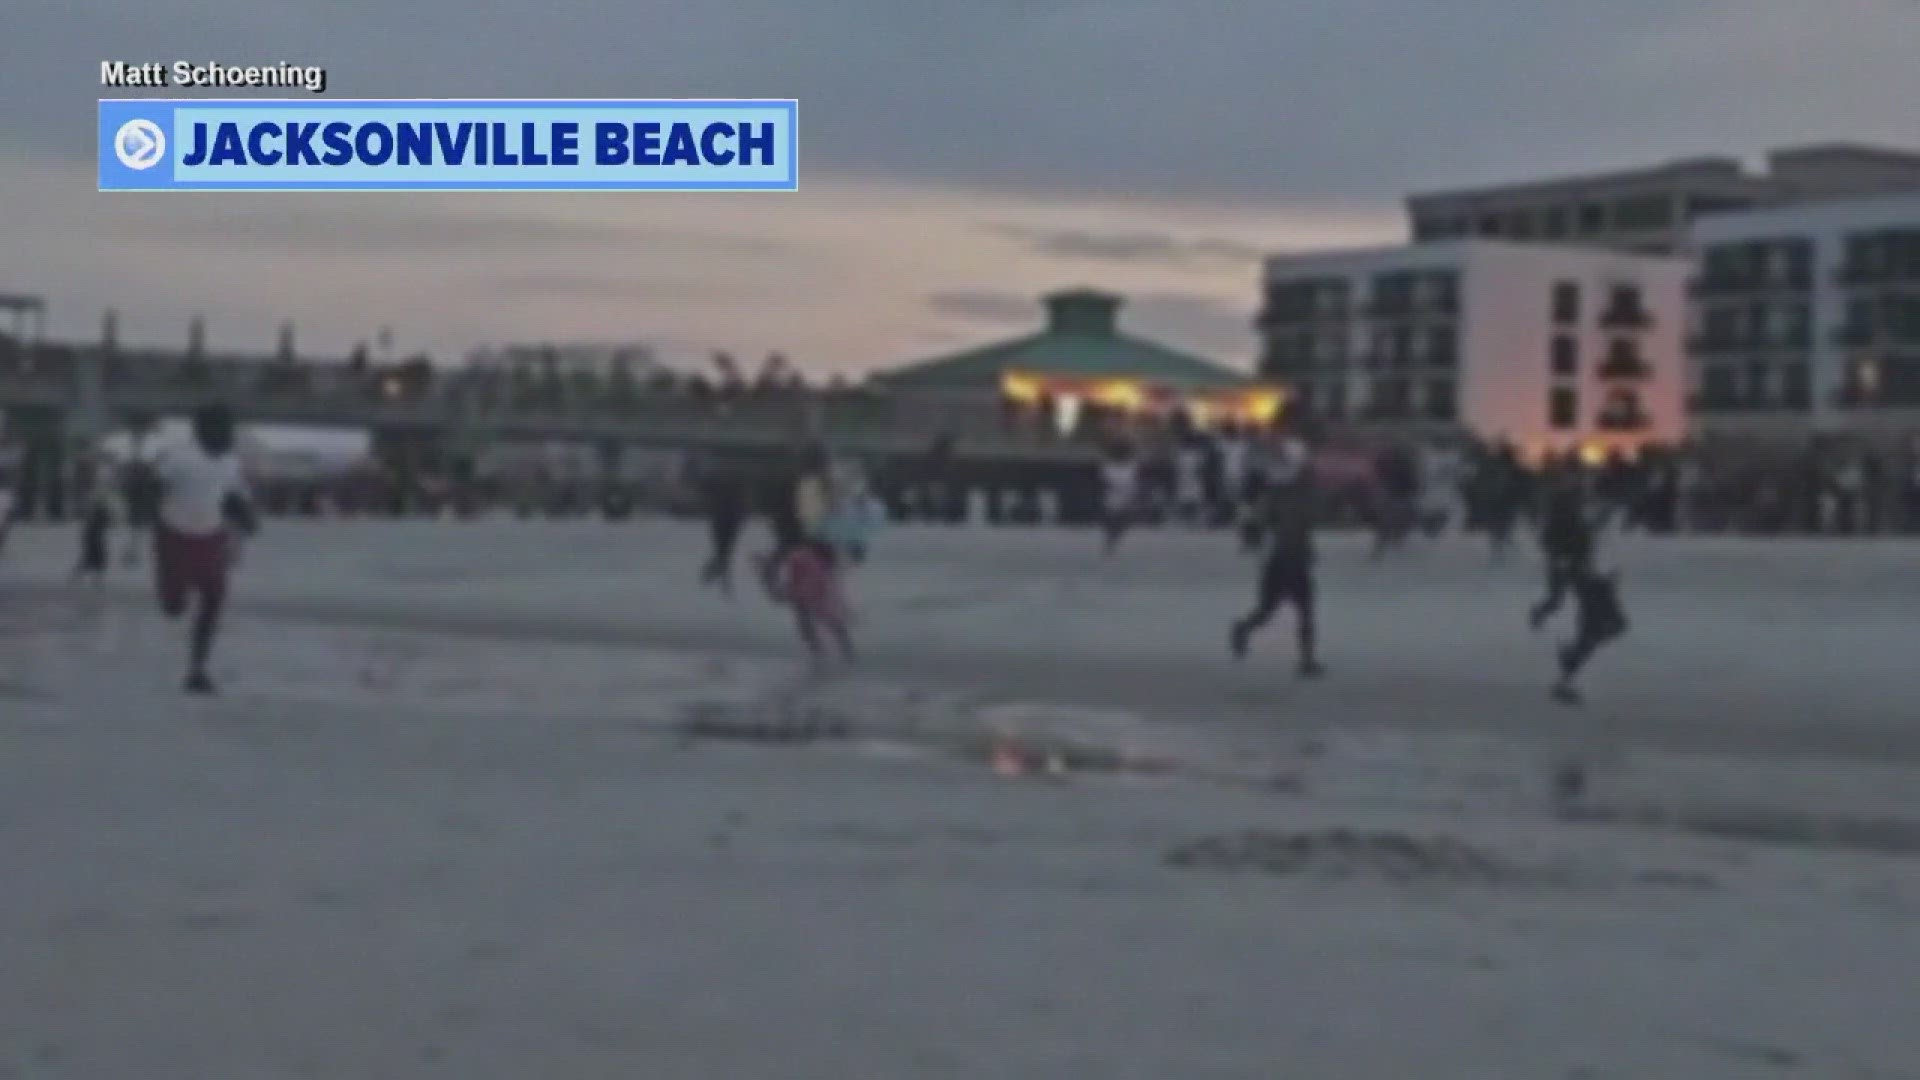 Three unrelated shootings in Jacksonville Beach over a span of less than an hour are raising questions about security at the beaches during spring break.